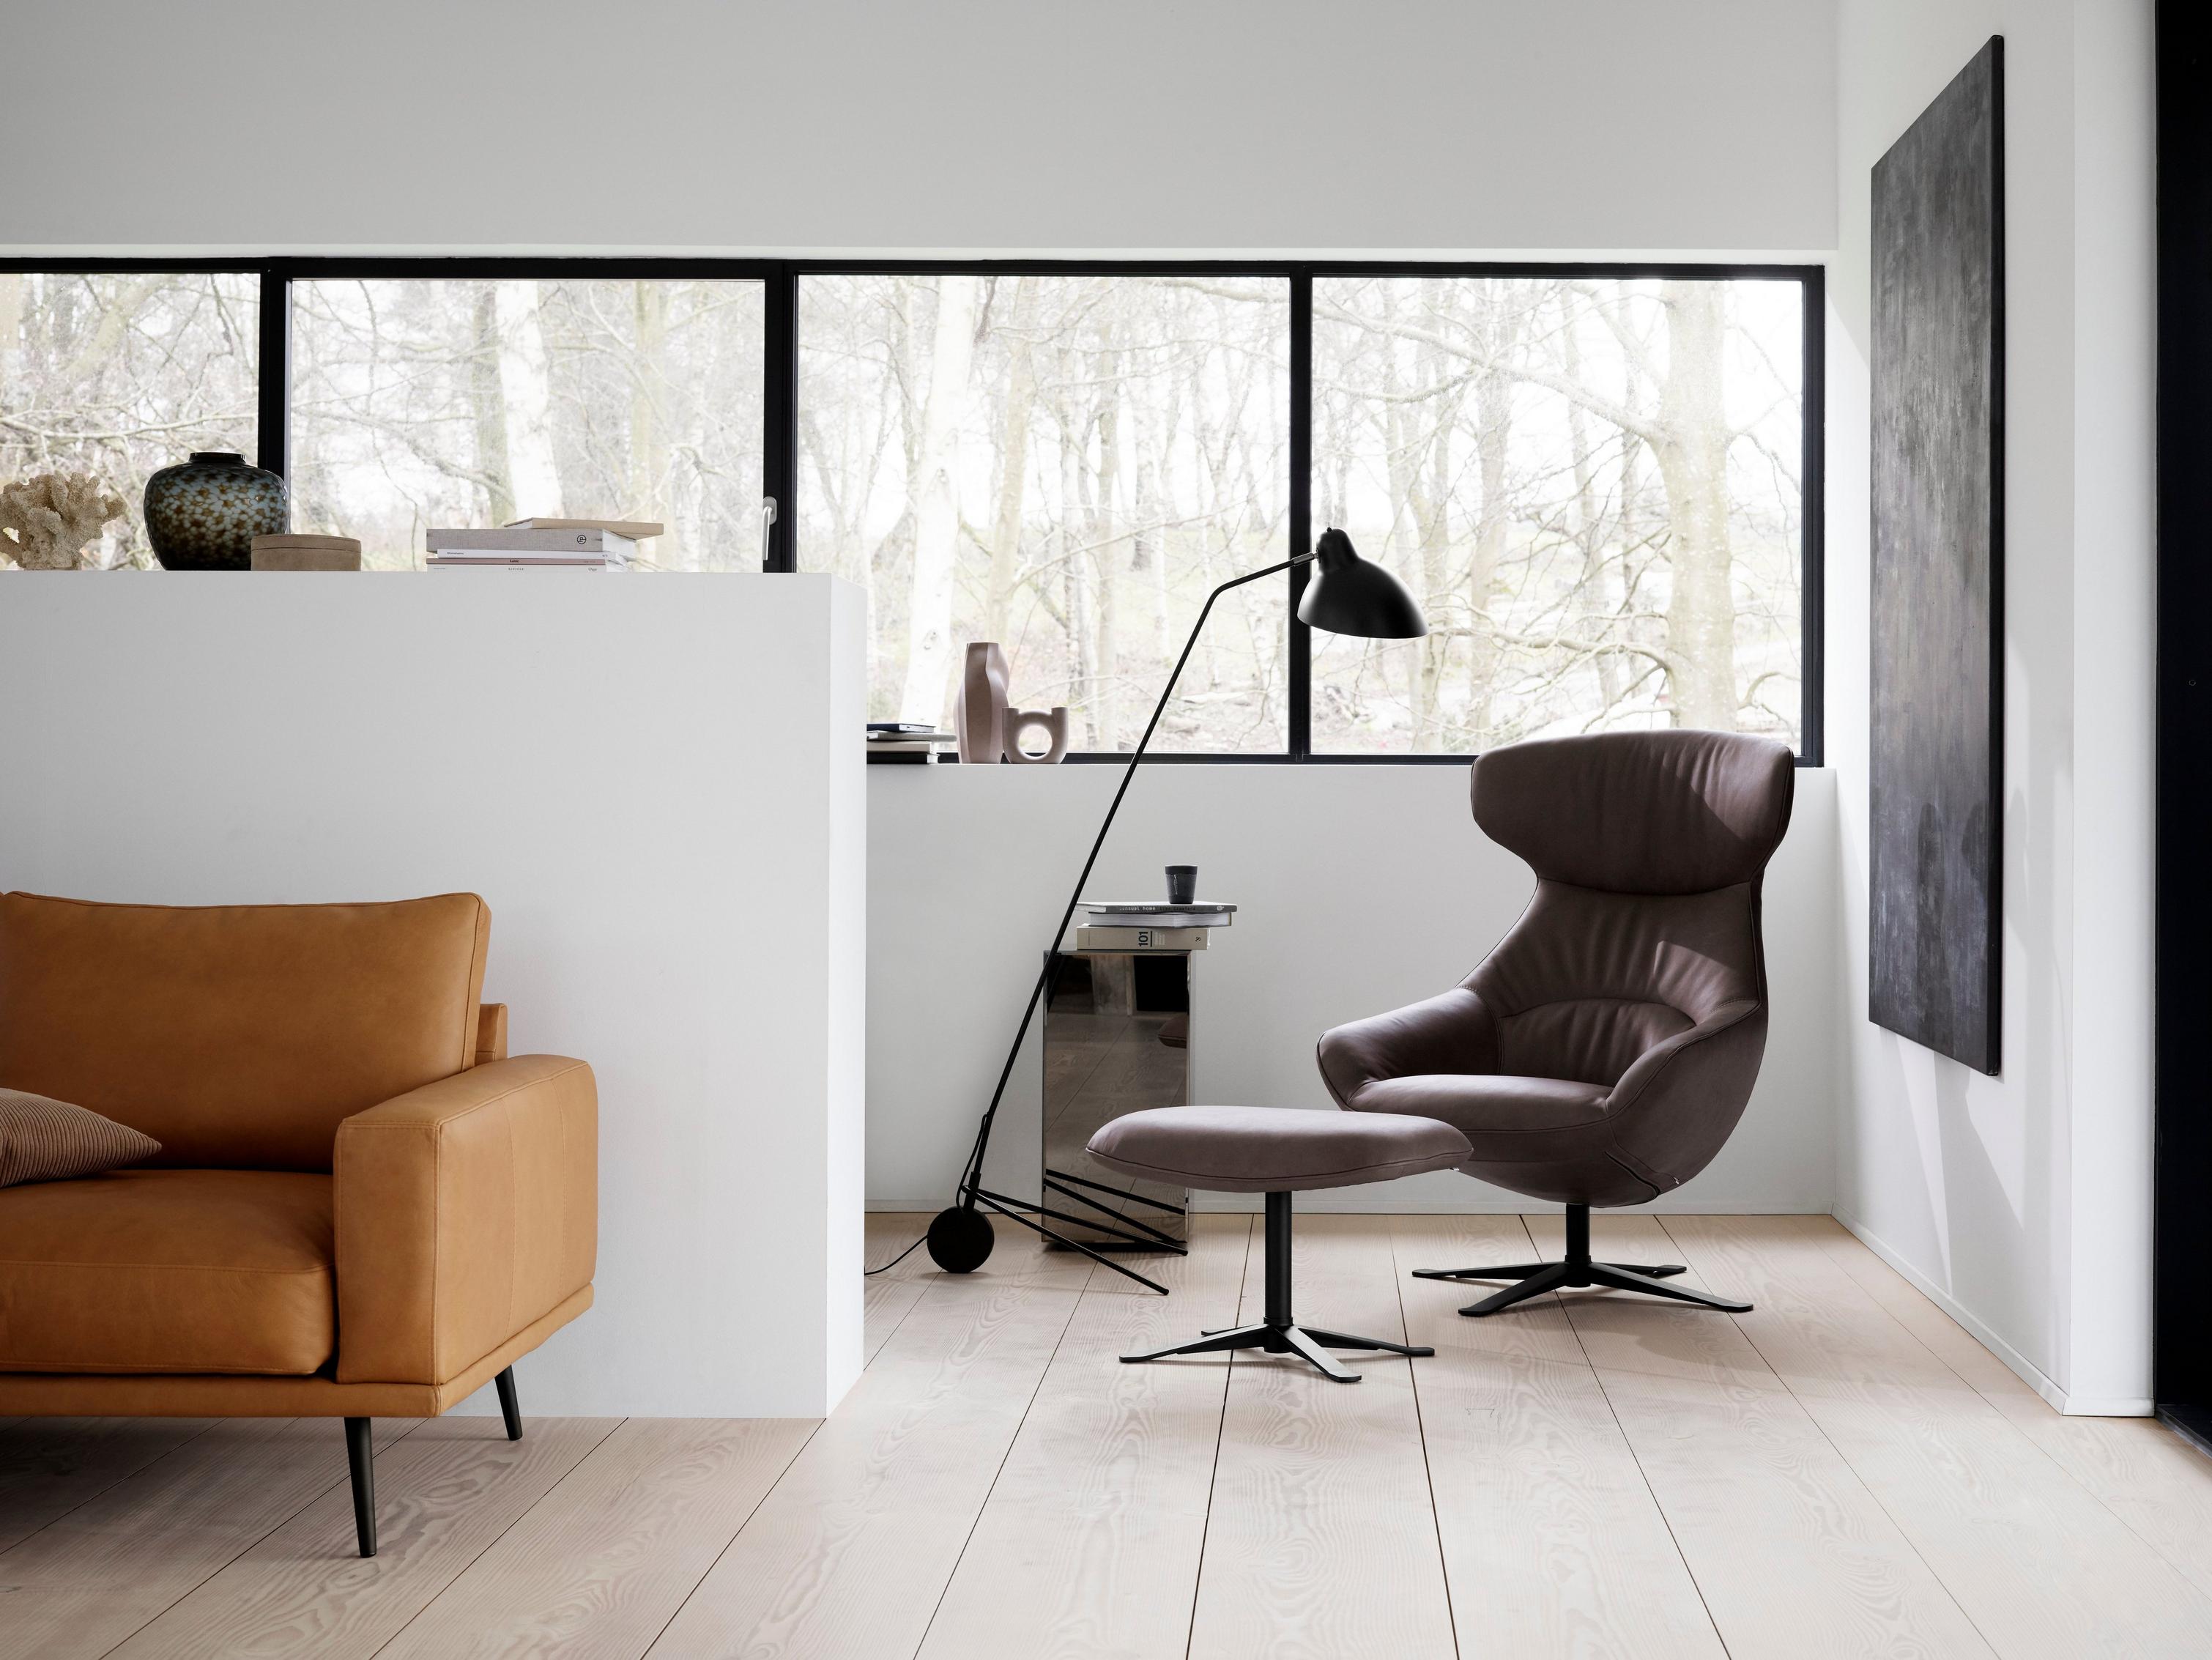 Modern reading corner with a tan armchair, dark lounge Porto chair and footrest, floor lamp, and forest view.